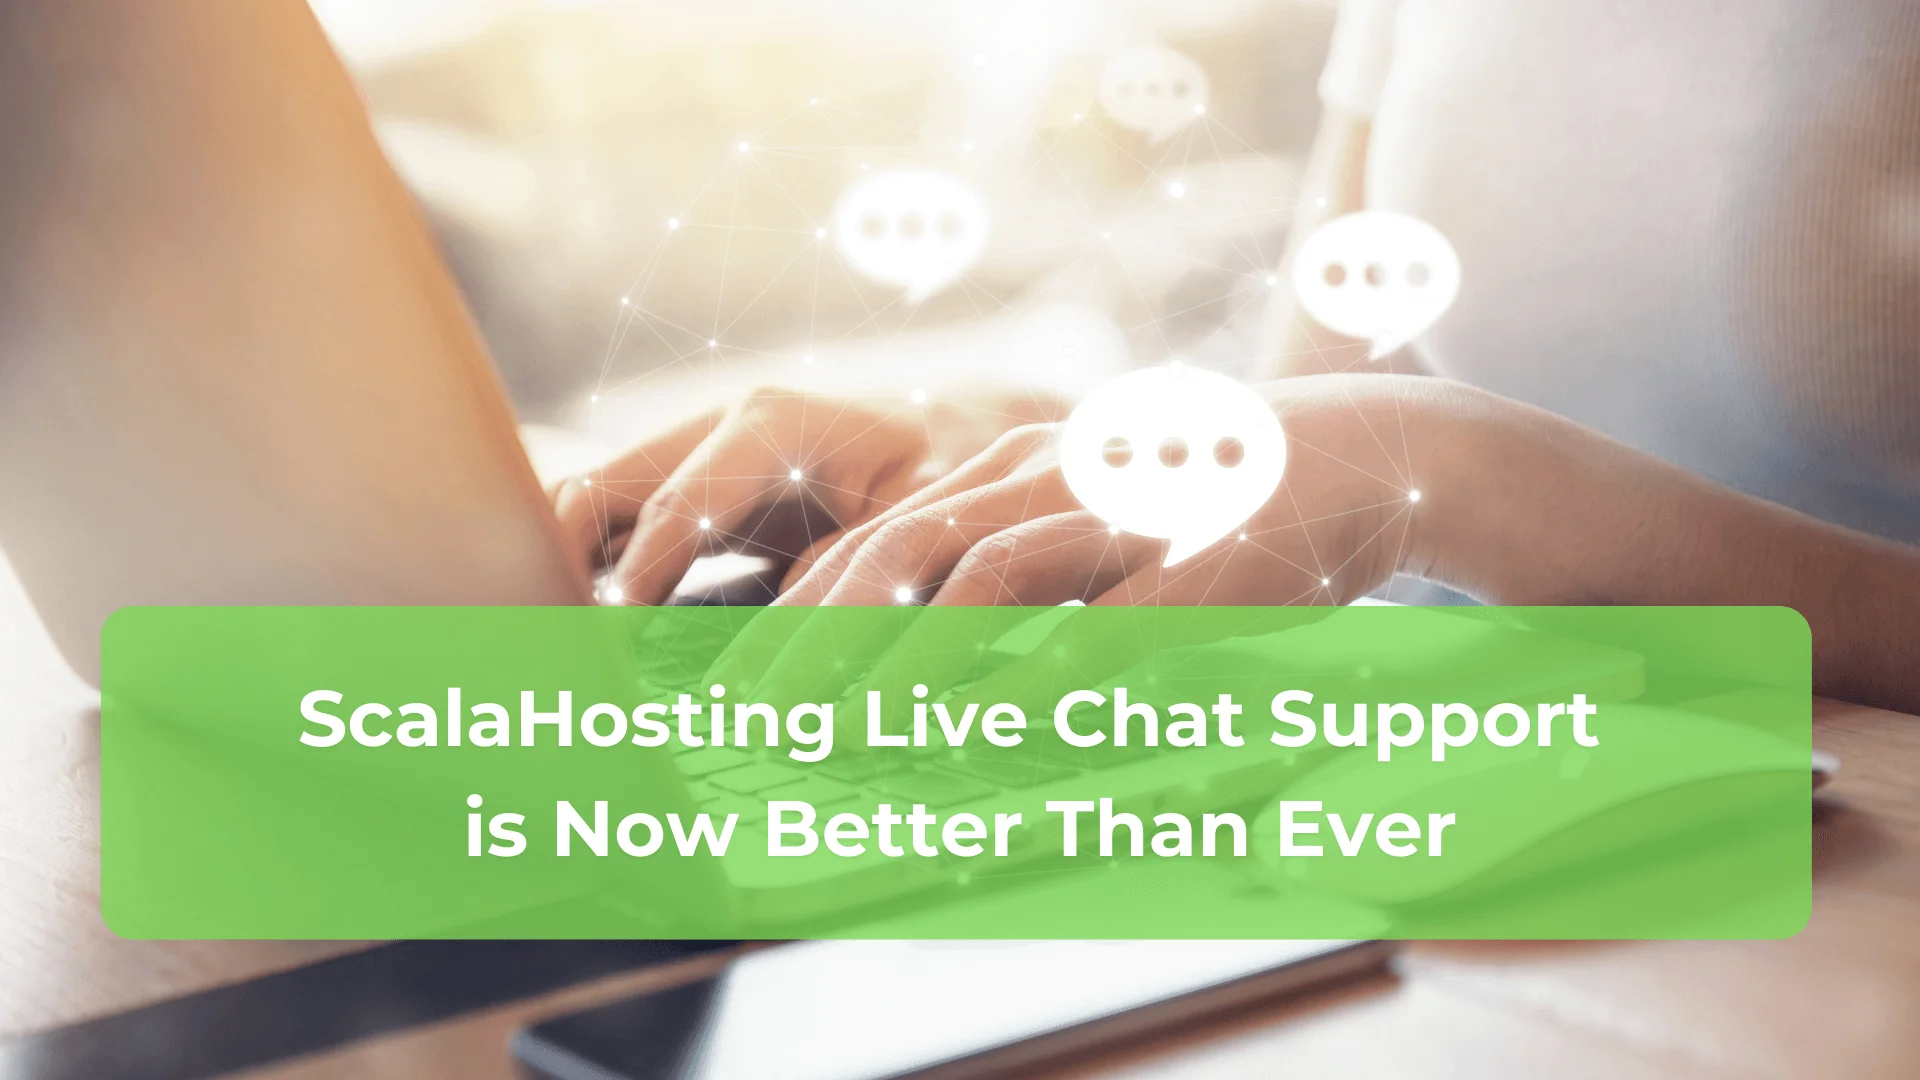 ScalaHosting Live Chat Support is Now Better Than Ever